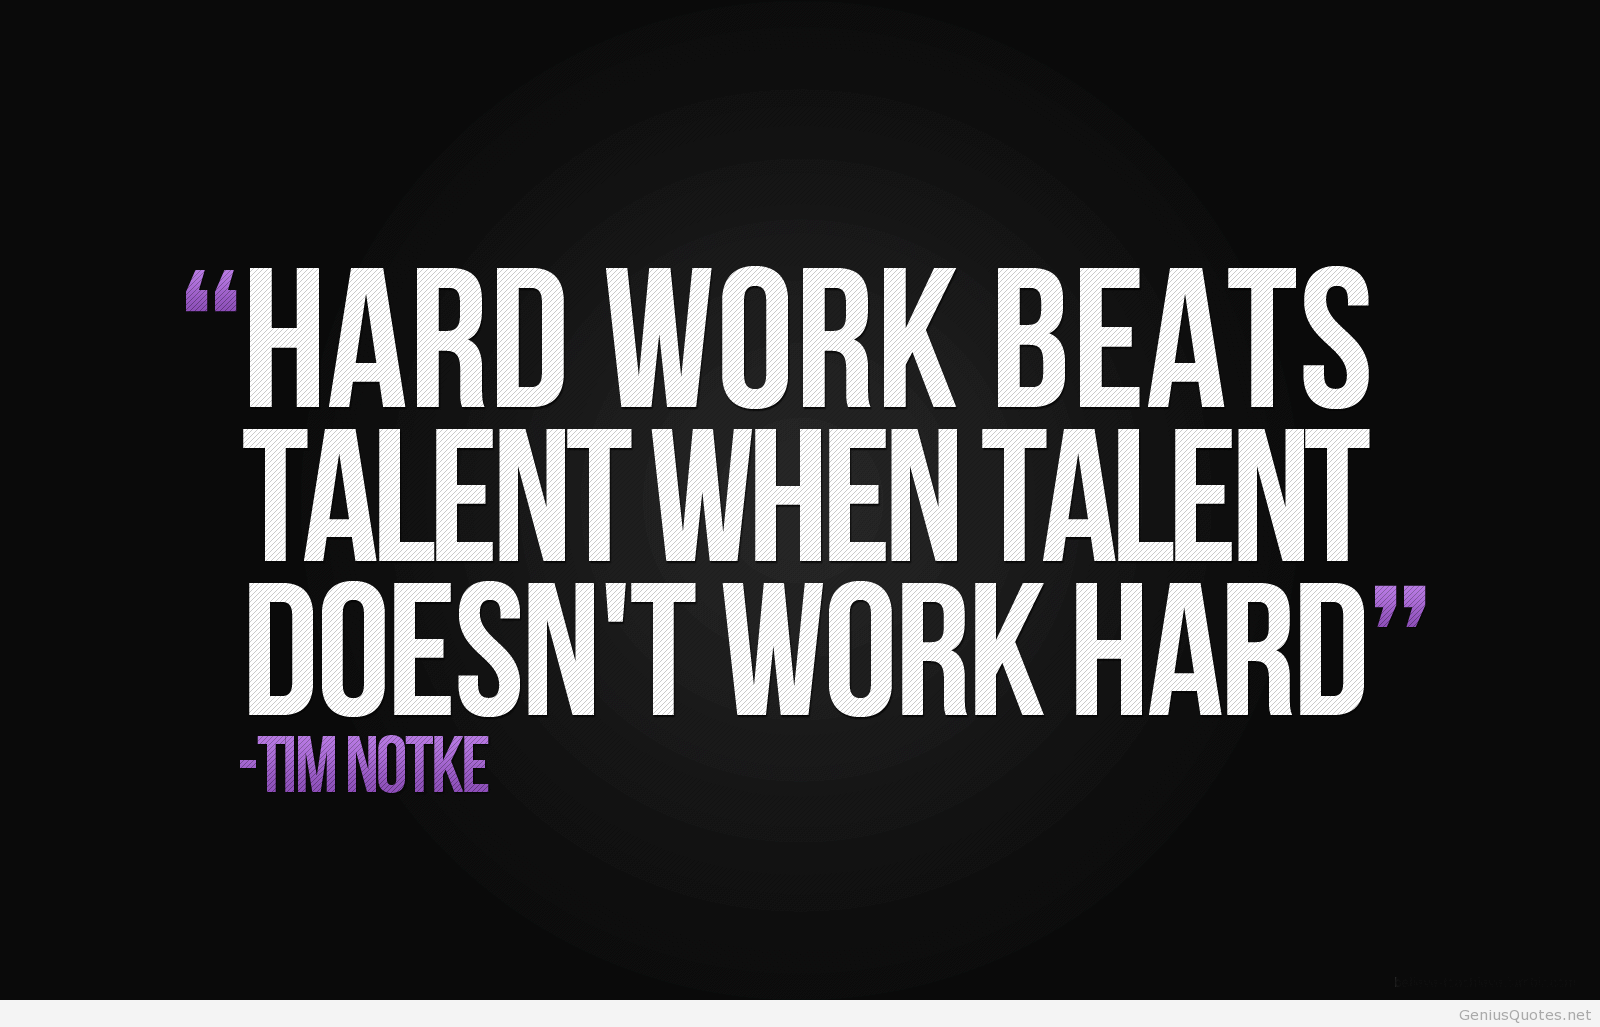 25 Hard Work Quote Sayings Images & Photos